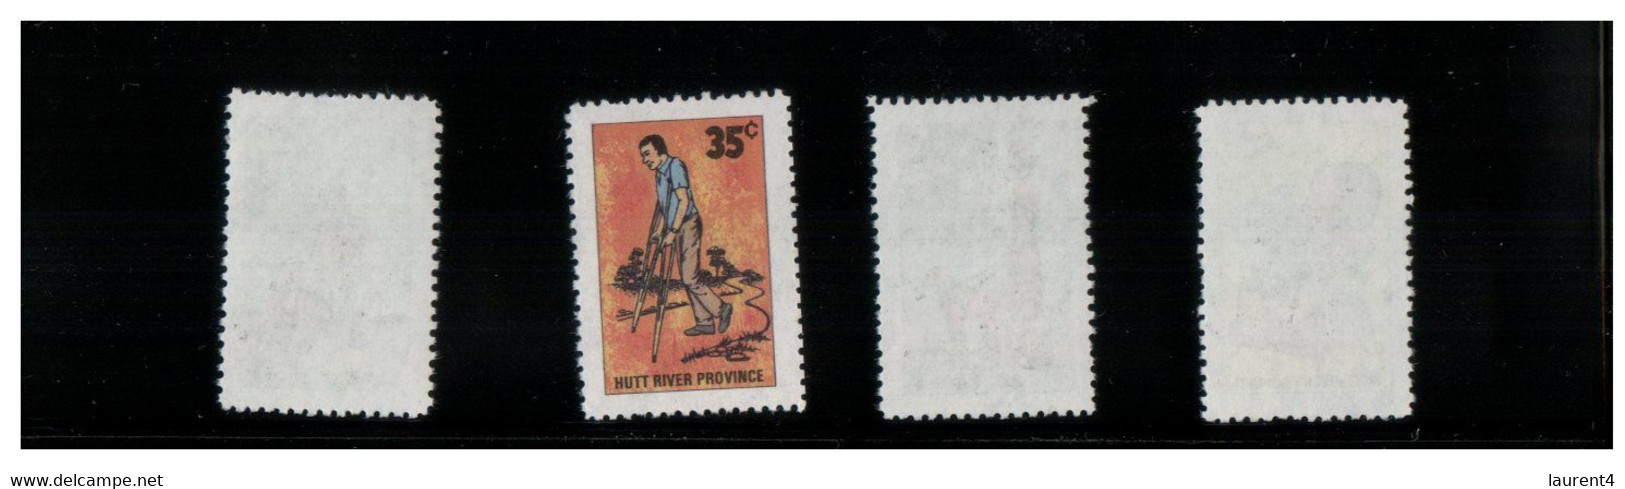 (O 17) Australia - Hutt River Province Cinderella Stamps (micro State) 1981 Disabled Year (4 Stamps) - Cinderelas